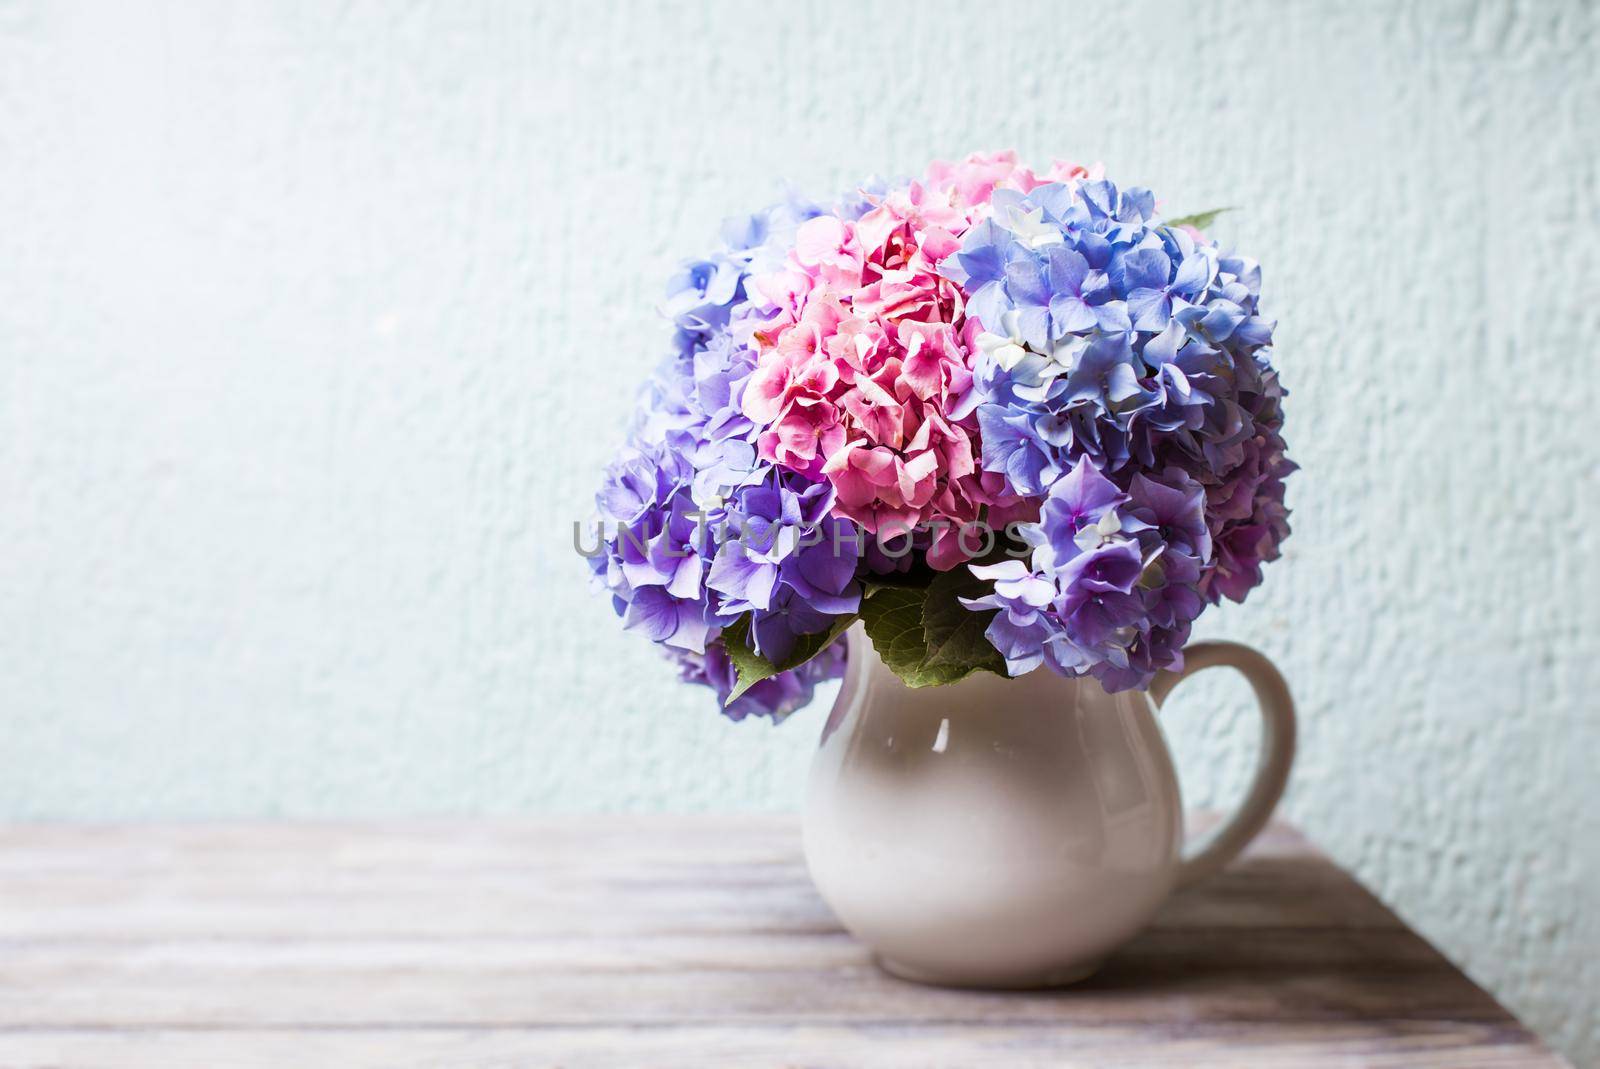 Hydrangea flowers in a white jug on the shabby wooden table